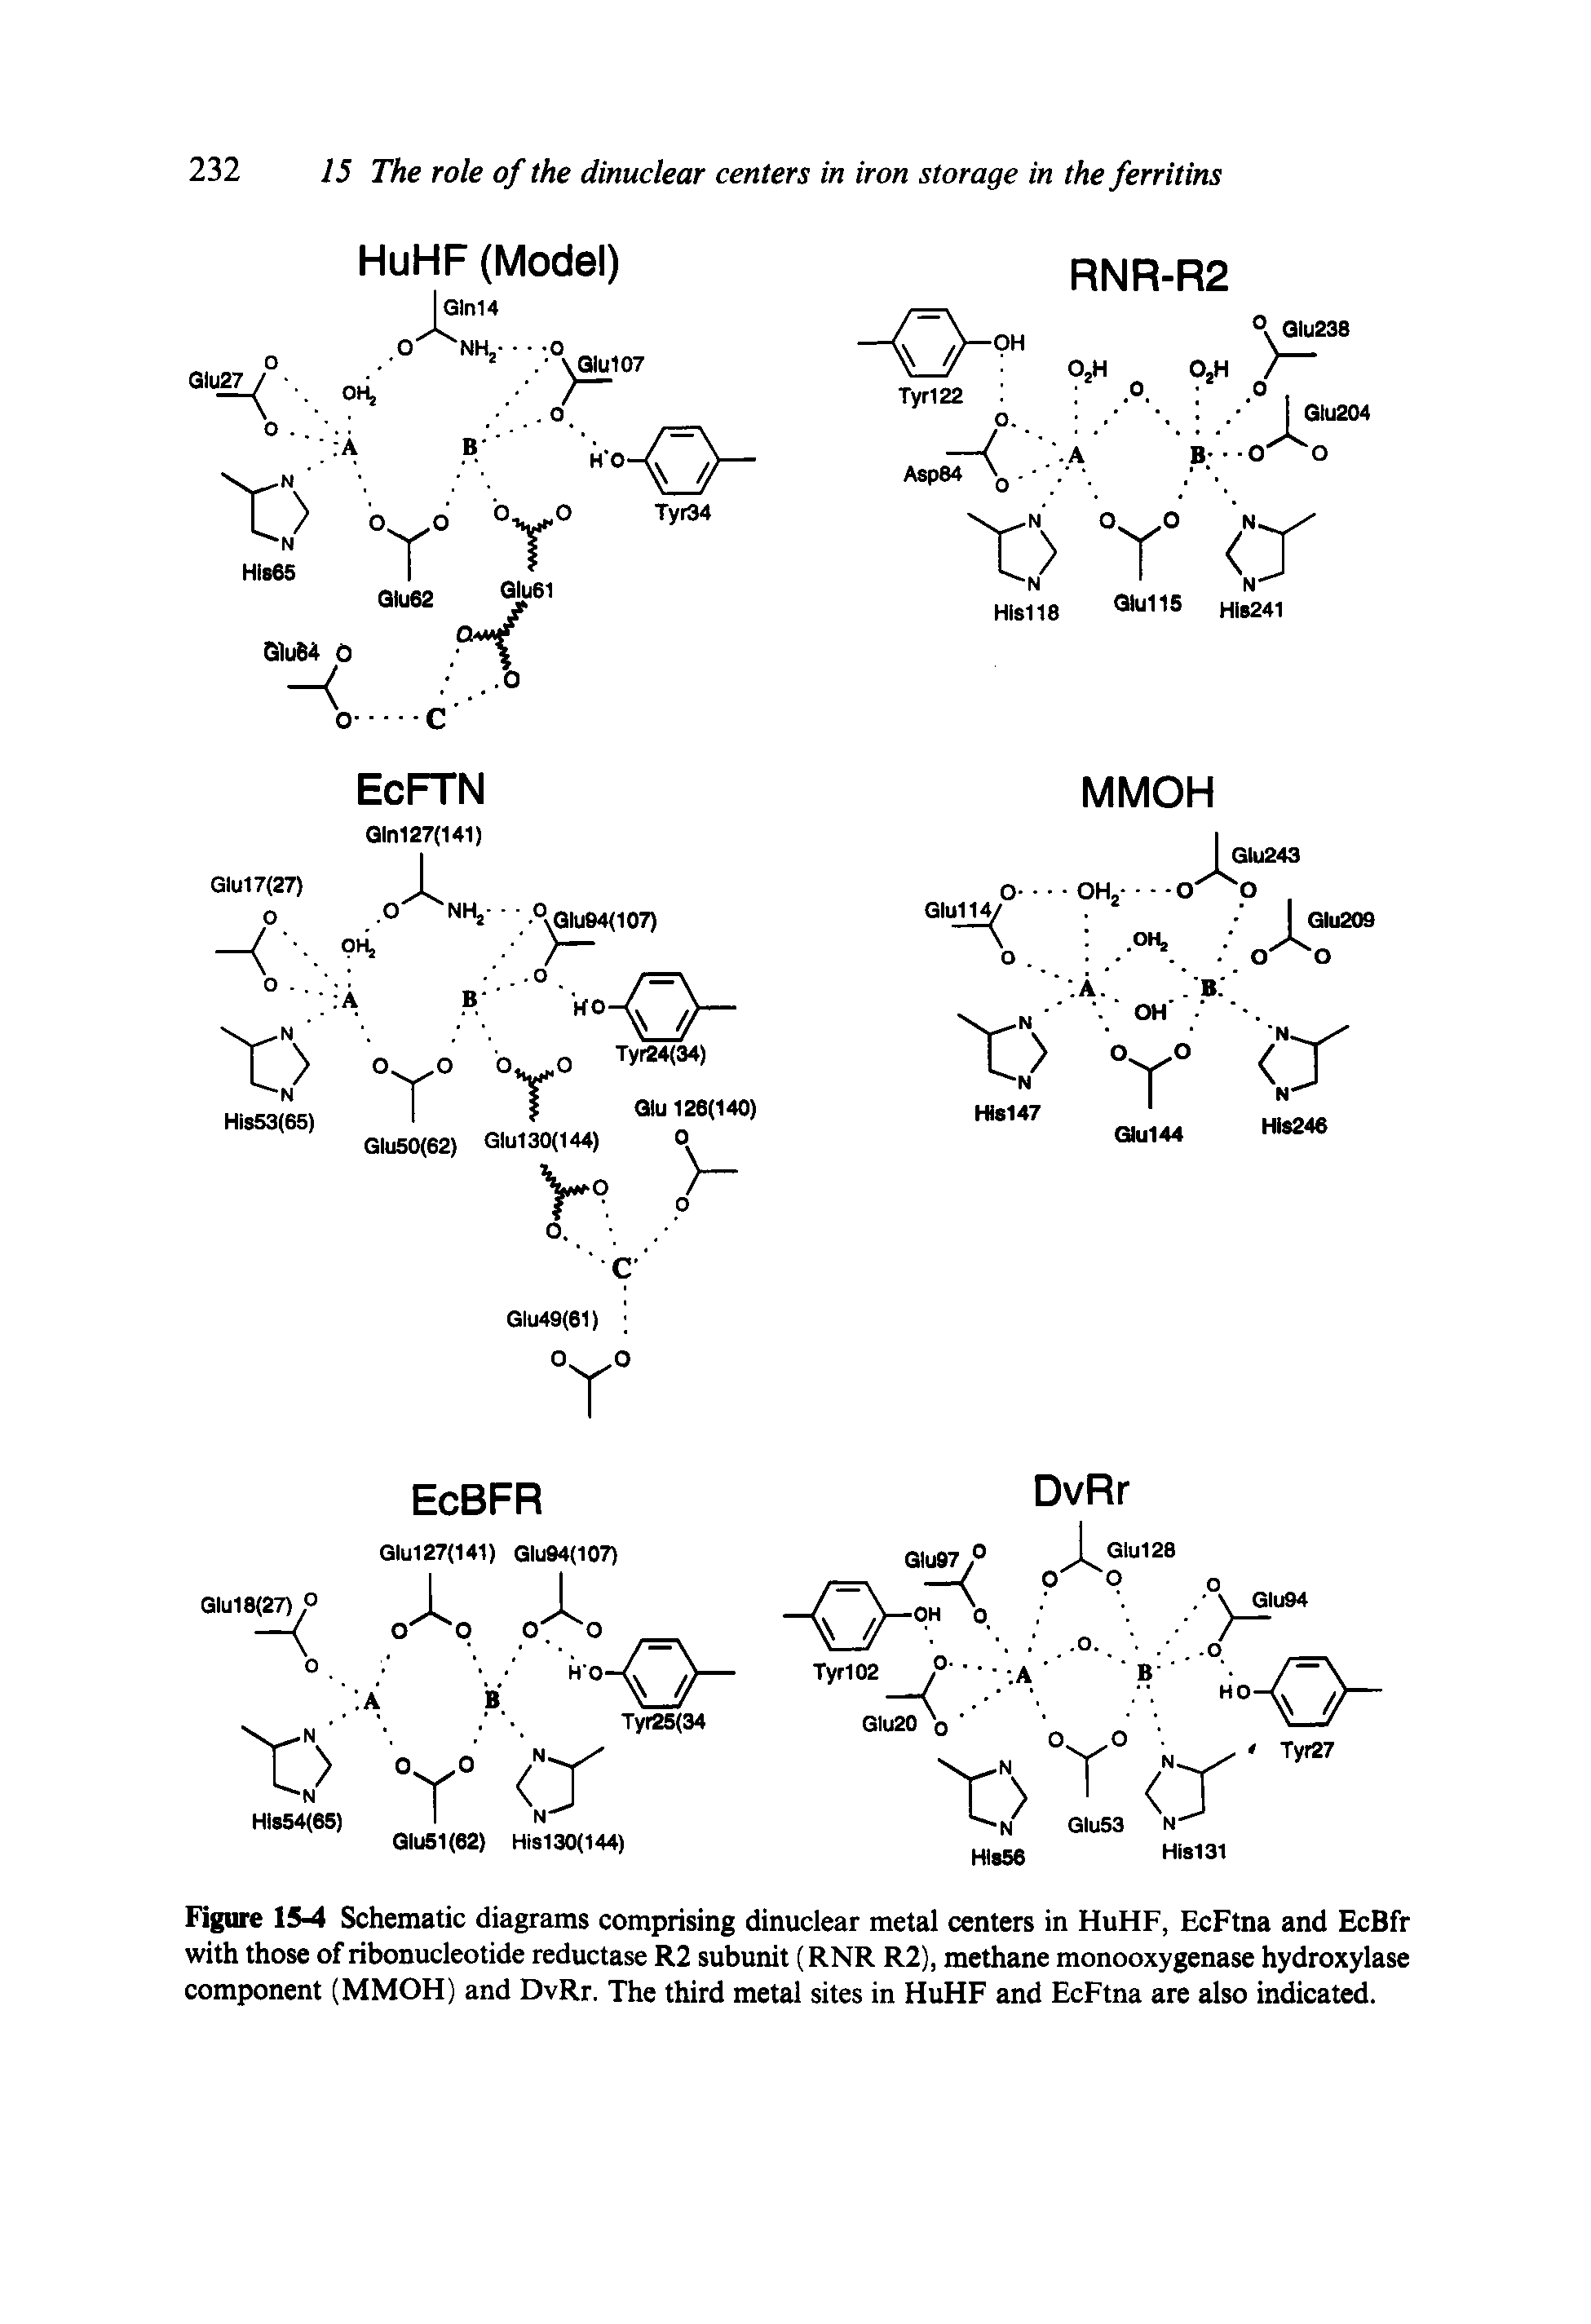 Figure 15-4 Schematic diagrams comprising dinuclear metal centers in HuHF, EcFtna and EcBfr with those of ribonucleotide reductase R2 subunit (RNR R2), methane monooxygenase hydroxylase component (MMOH) and DvRr. The third metal sites in HuHF and EcFtna are also indicated.